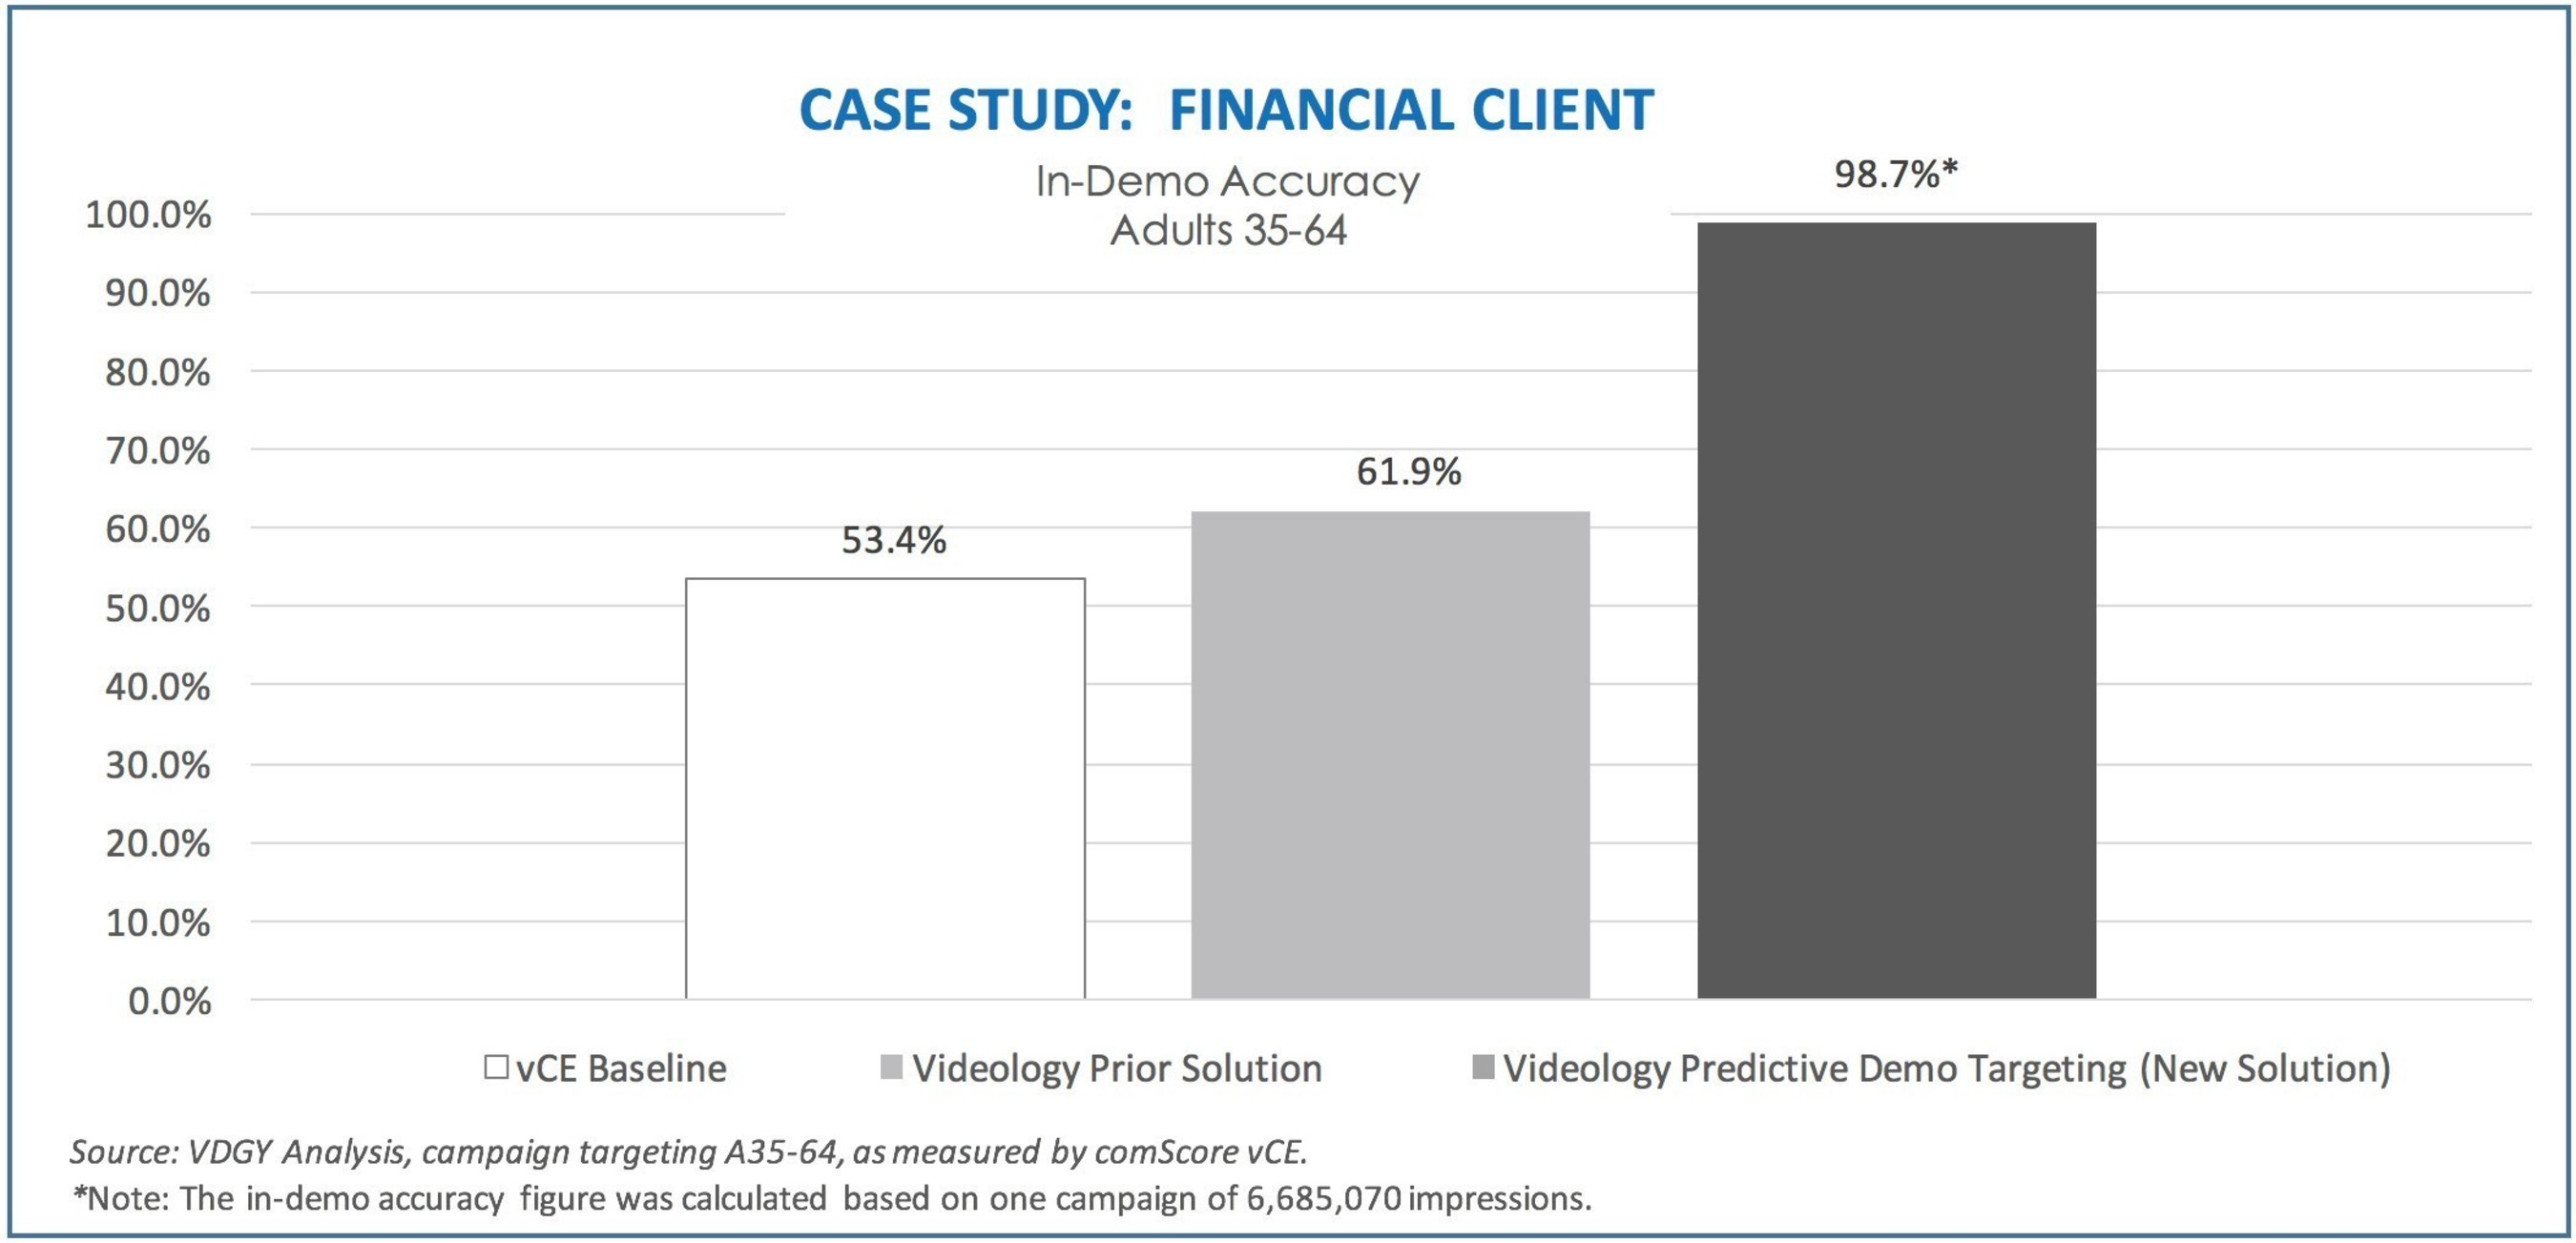 Through recent platform advancements and extensive data integrations, Videology can now predict and target in-demo delivery with up to 98% confidence, as seen in the case study shown in Graph 1, measured by comScore vCE.